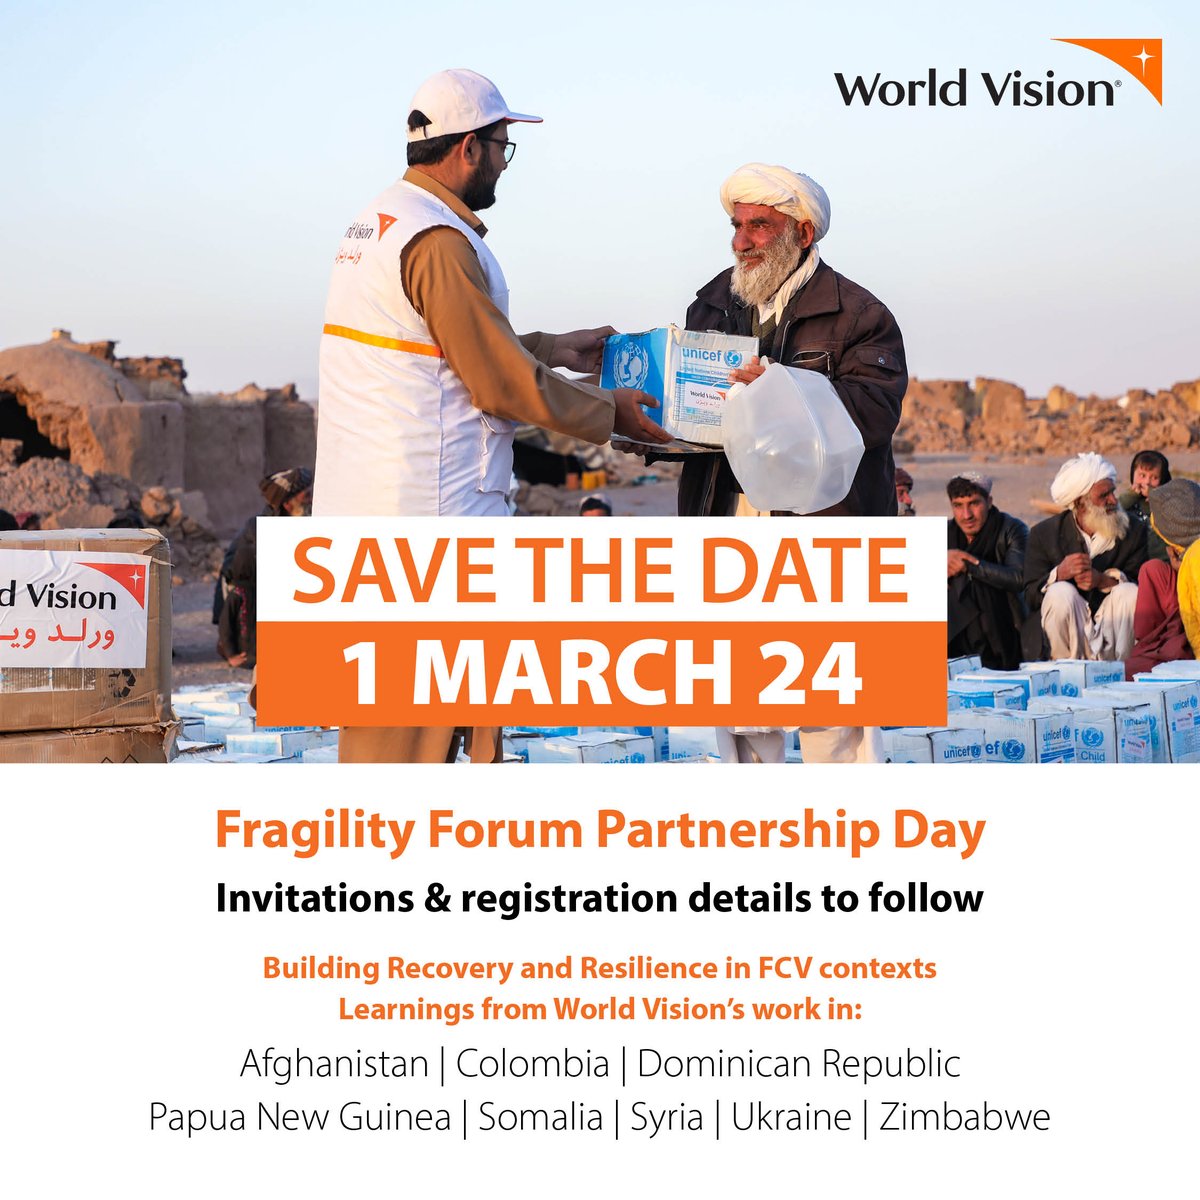 Register to be at our session on the partnership day of the #FragilityForum & hear about our work in FCV contexts. @WVSomalia @SomReP @Worldbank @ScrpSomalia @coopi @OxfamSomali @DRCSomalia @adra_somali @caresom @Shaqodoonorg @ACFsomaliaCD